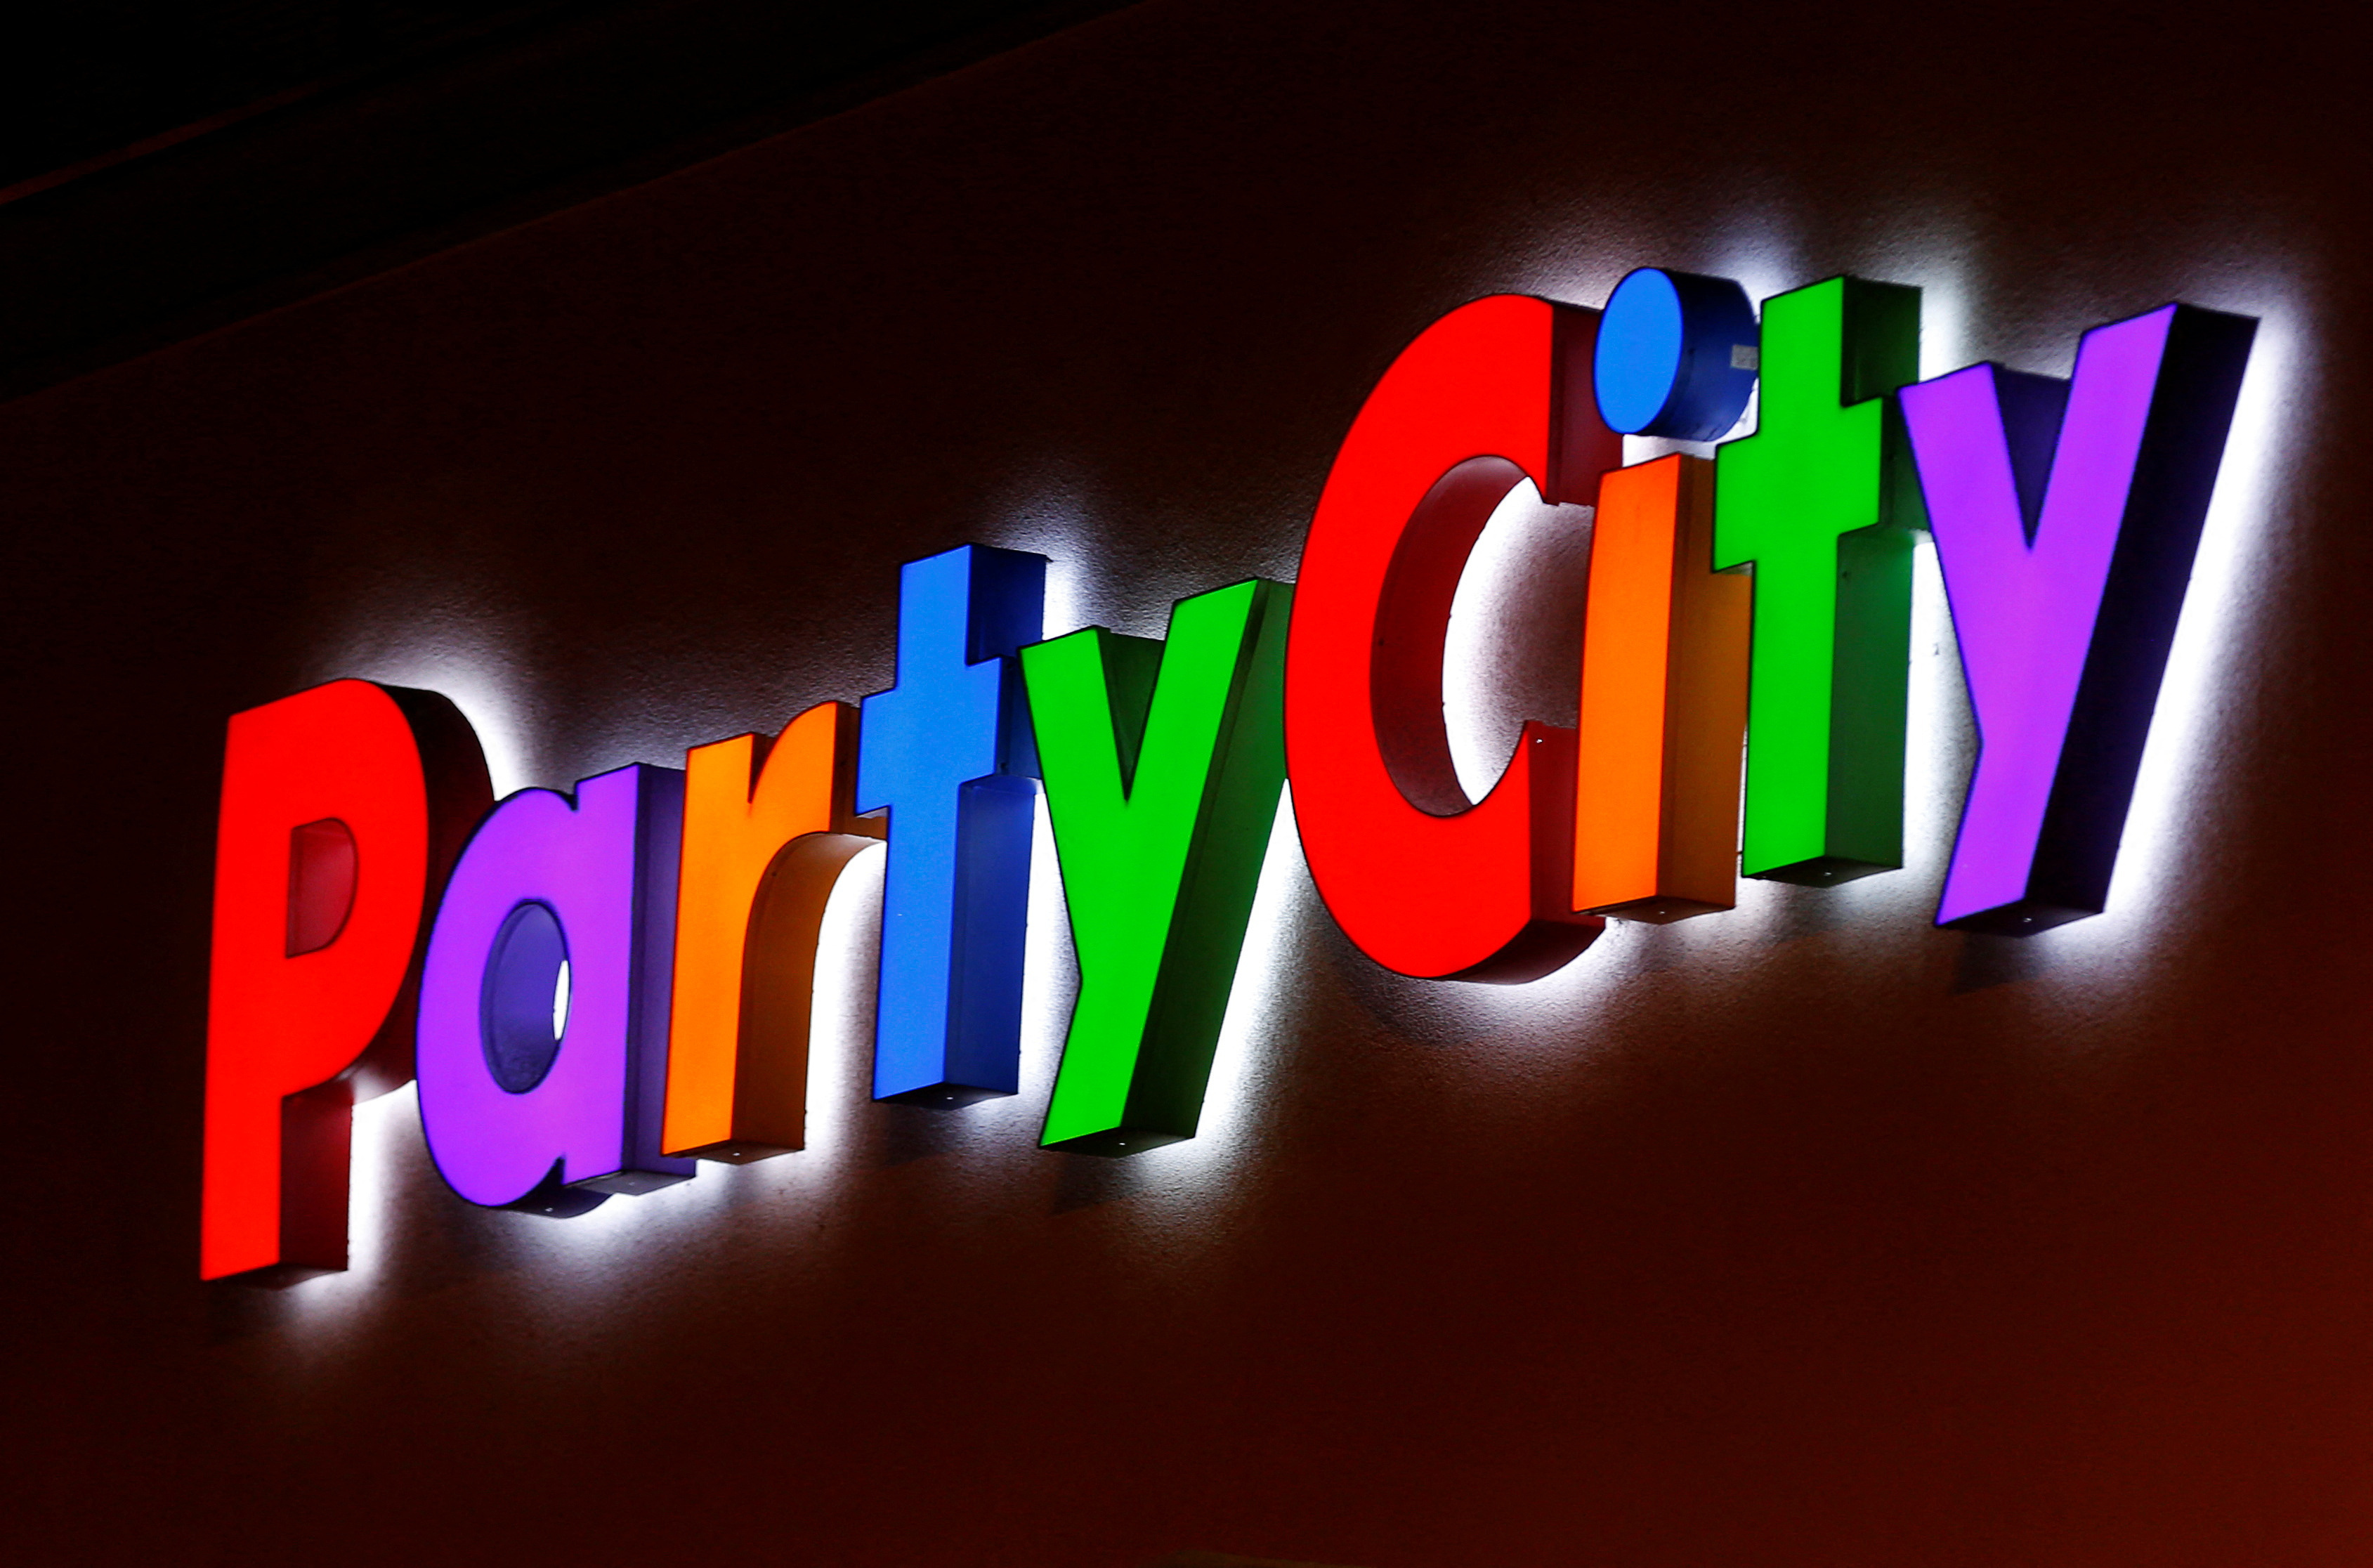 Party city bankruptcy docket